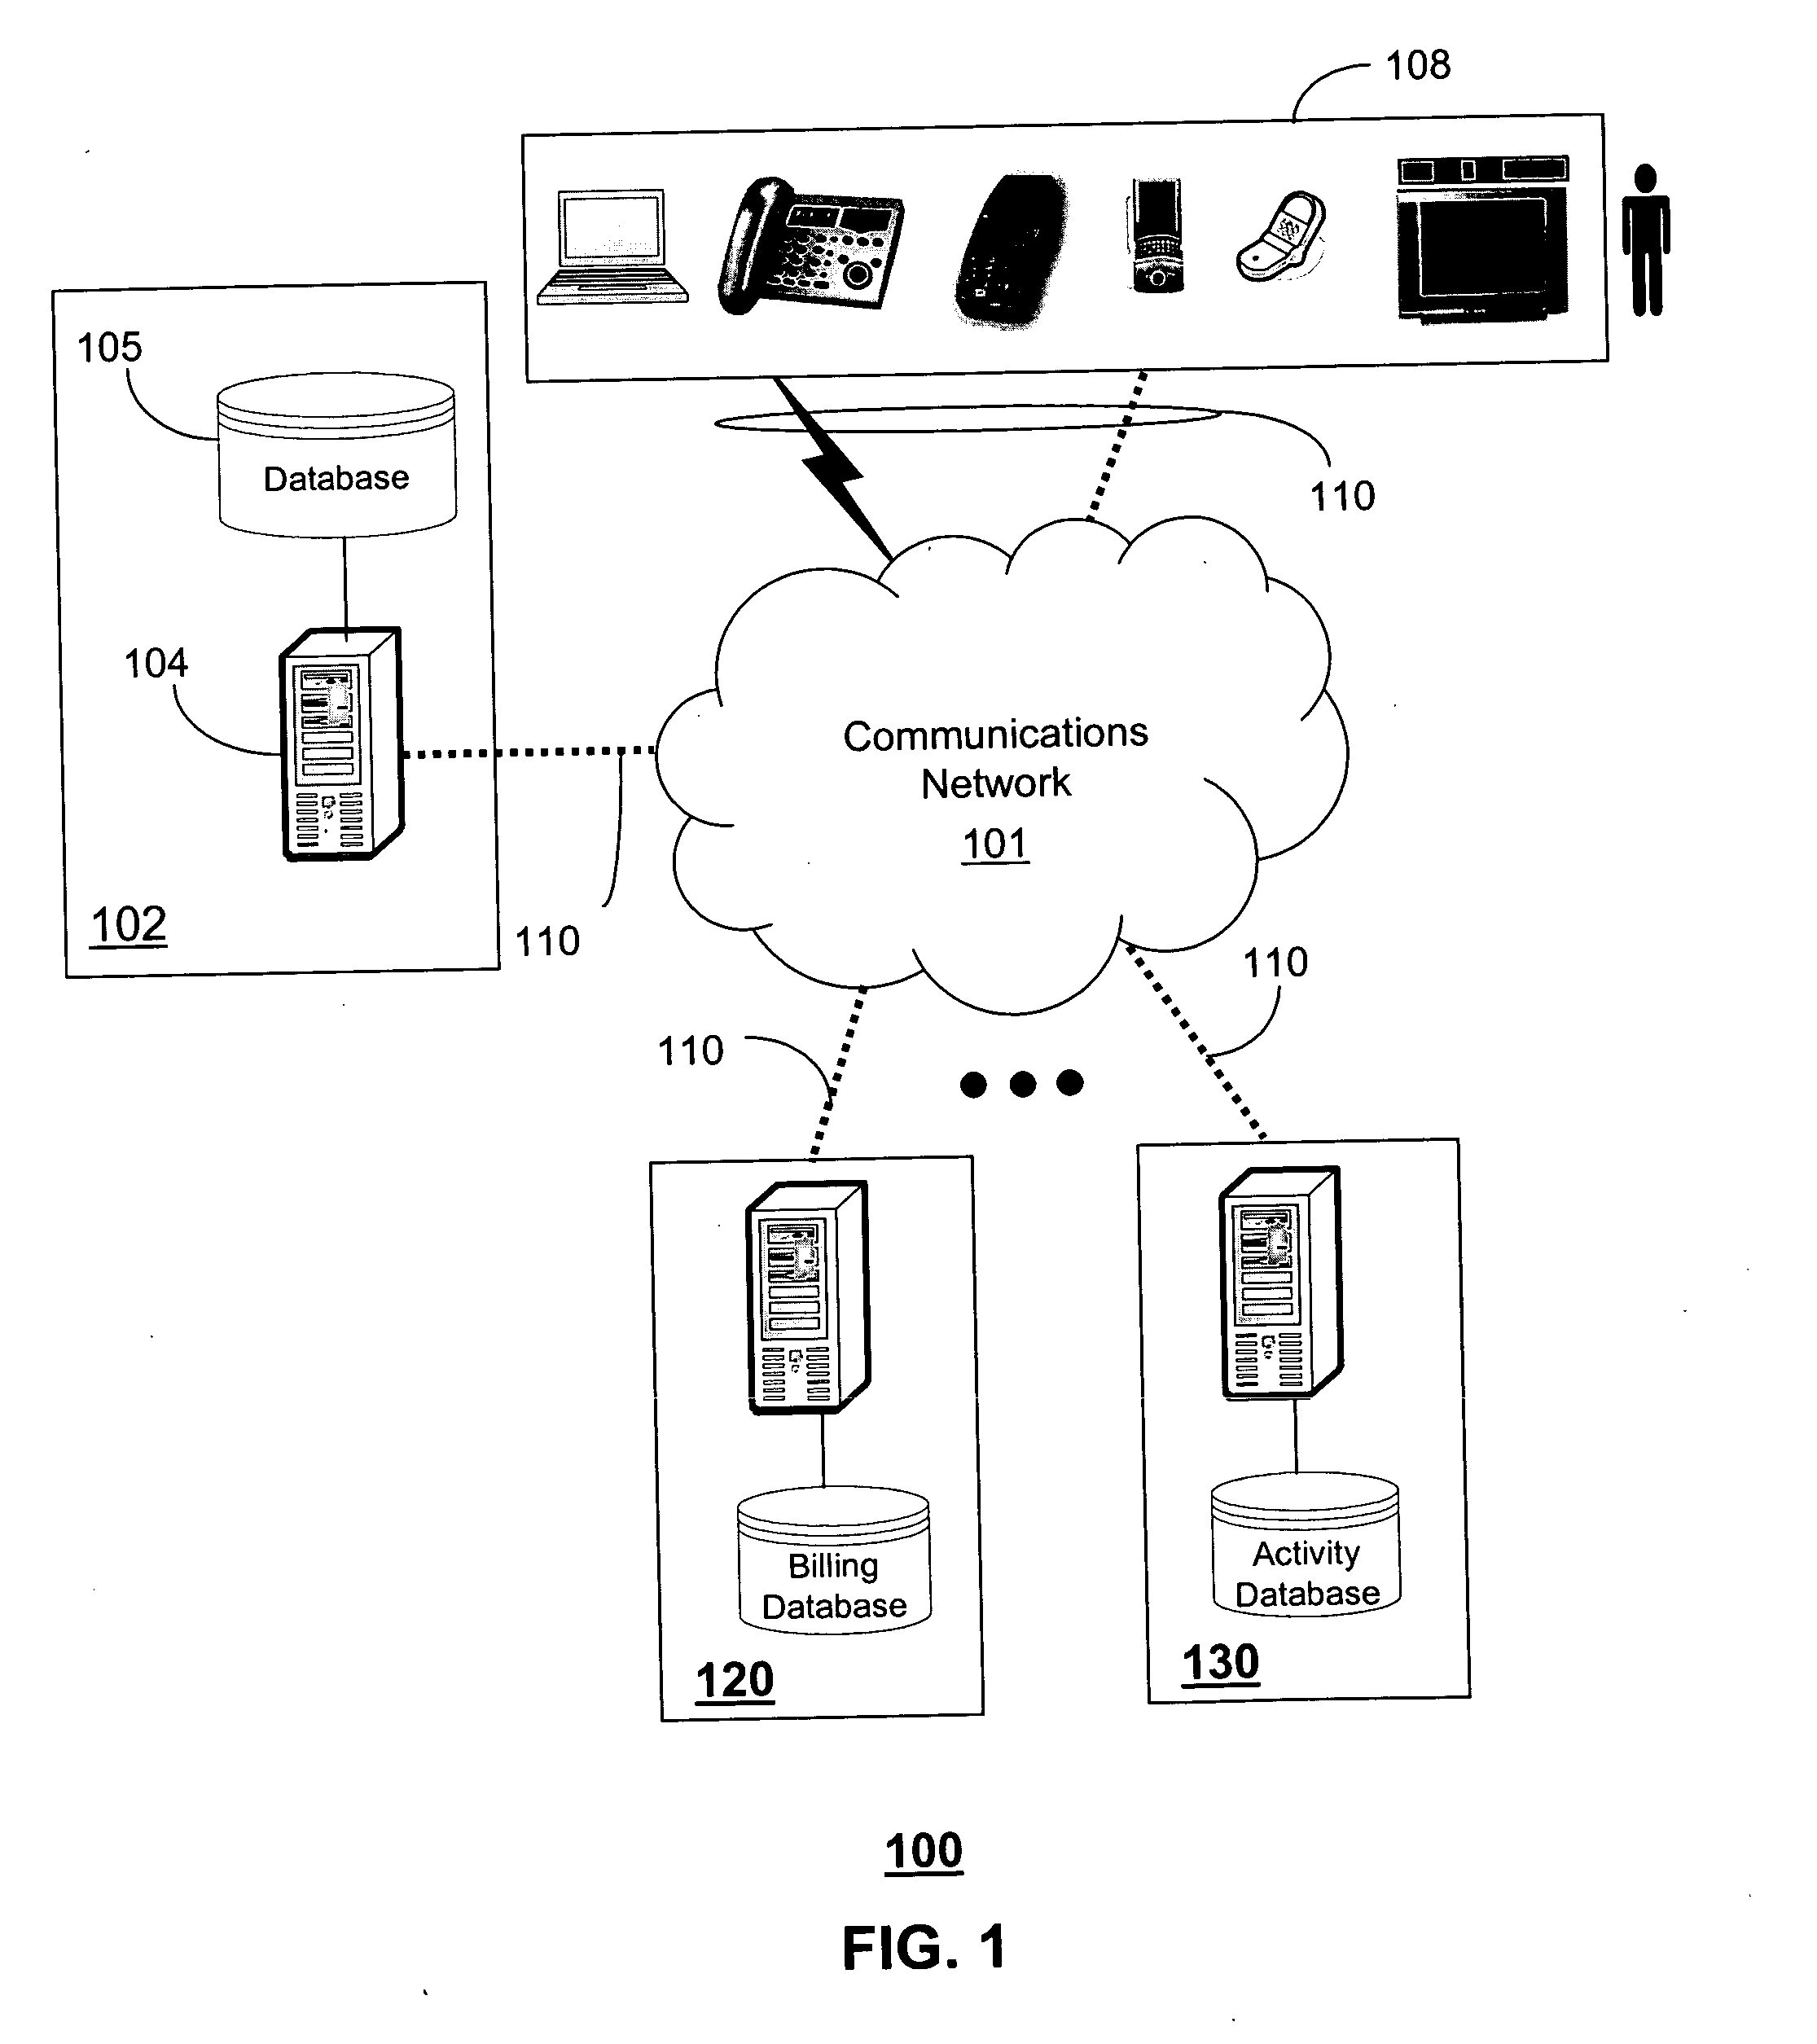 Method and apparatus for monitoring network activity